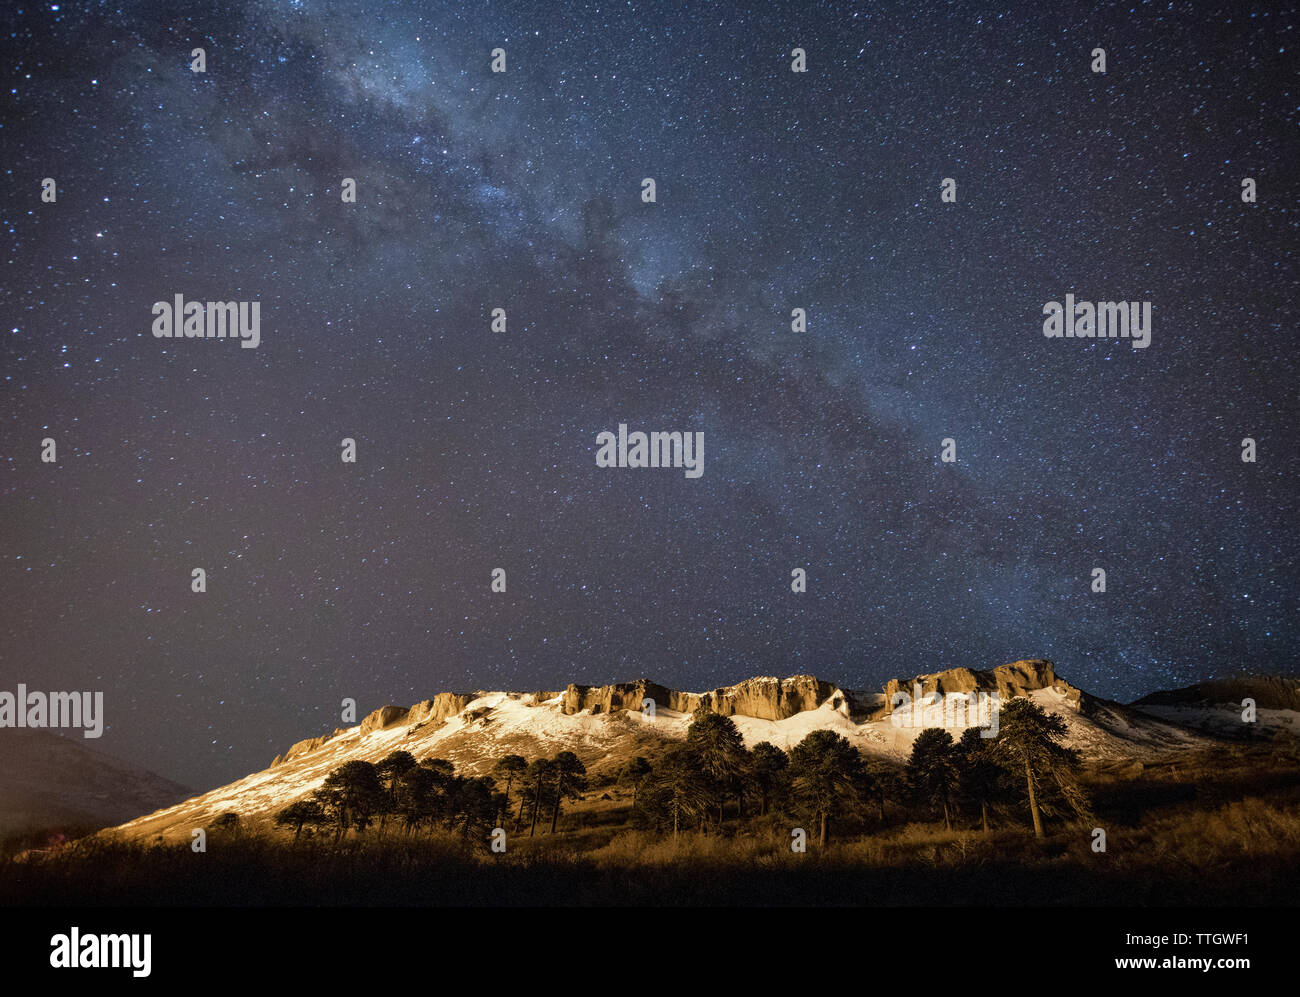 The Milky Way shines brightly above the town of Caviahue, Argentina. Stock Photo